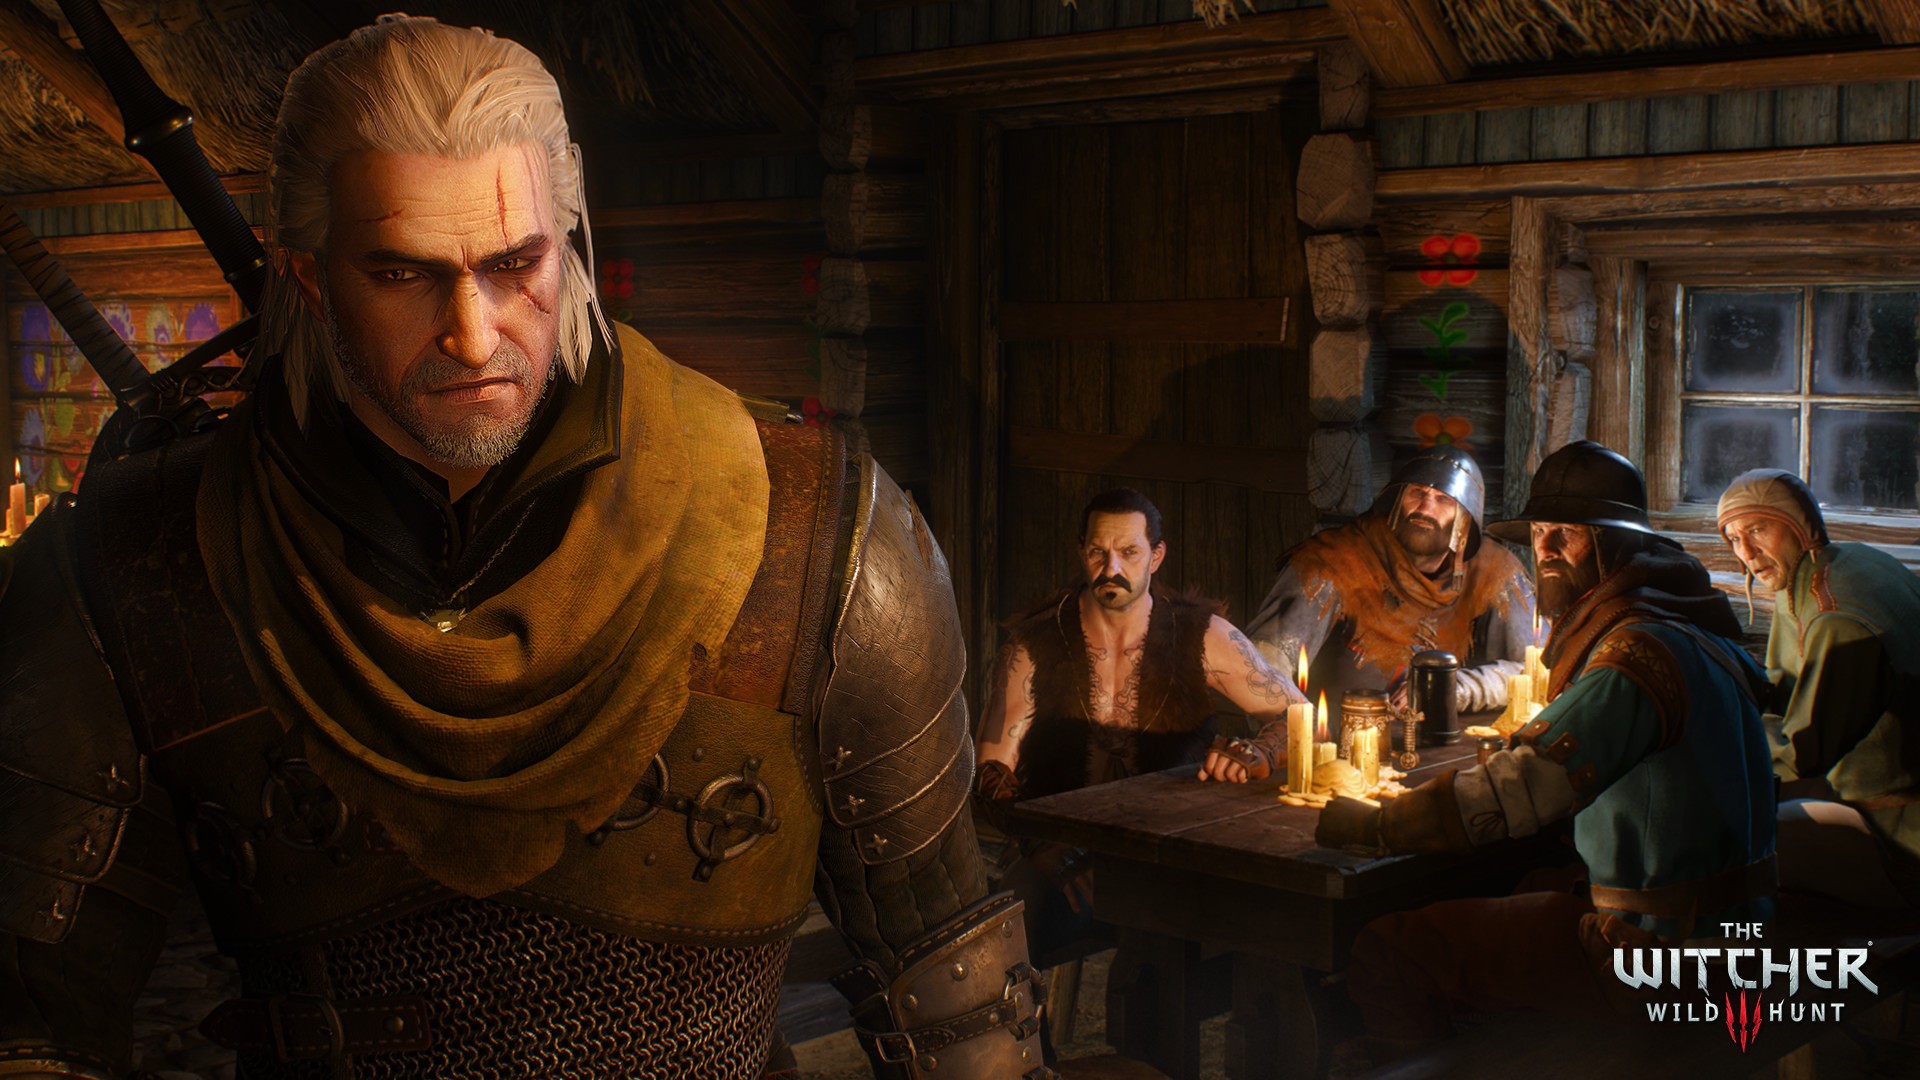 Geralt of Rivia, The Witcher 3: Wild Hunt, PC gaming, CD Projekt RED Wallpaper